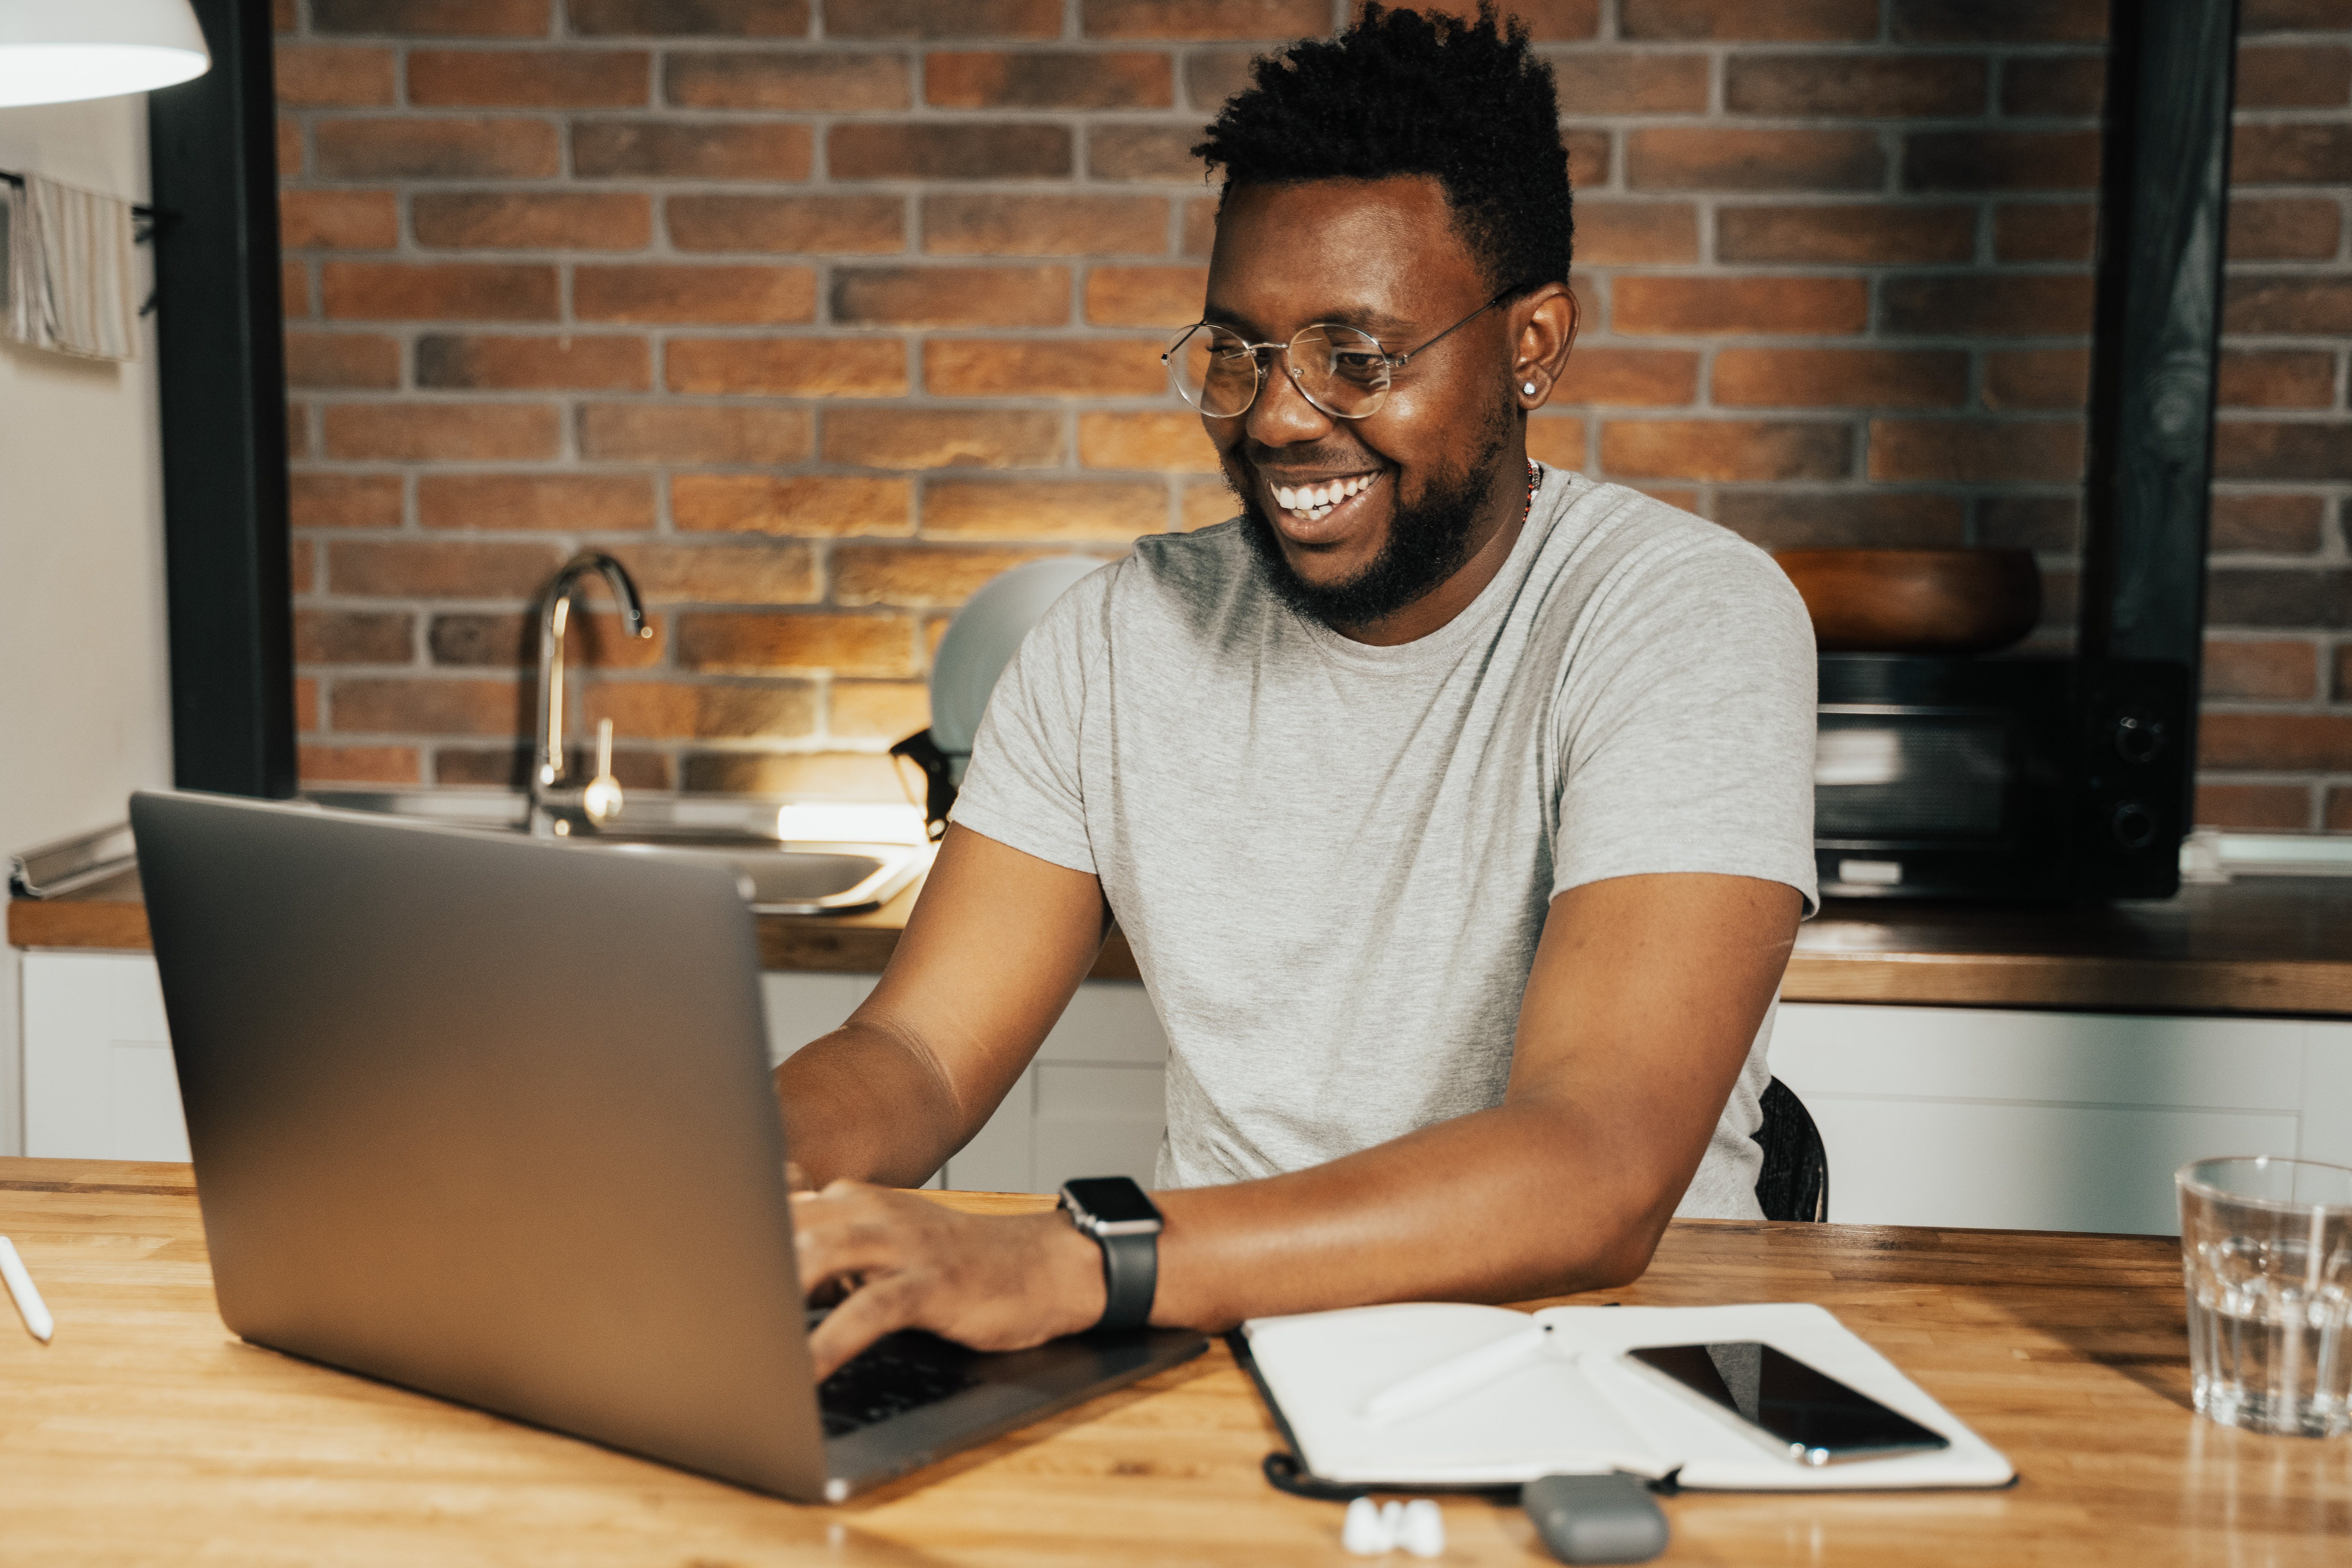 A person smiling while working on a laptop